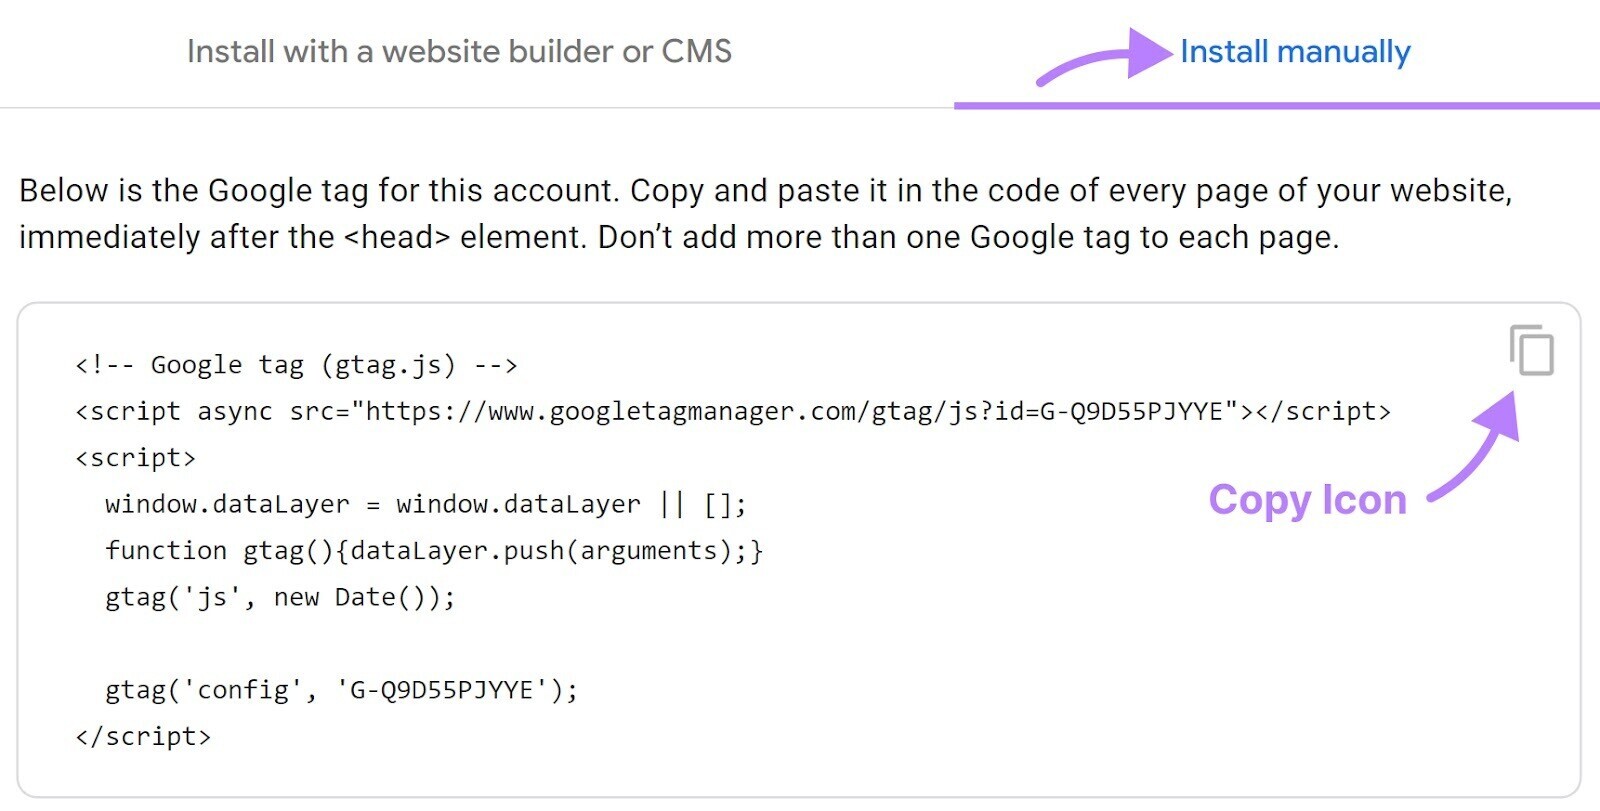 where to copy tracking code in the “Install manually” section